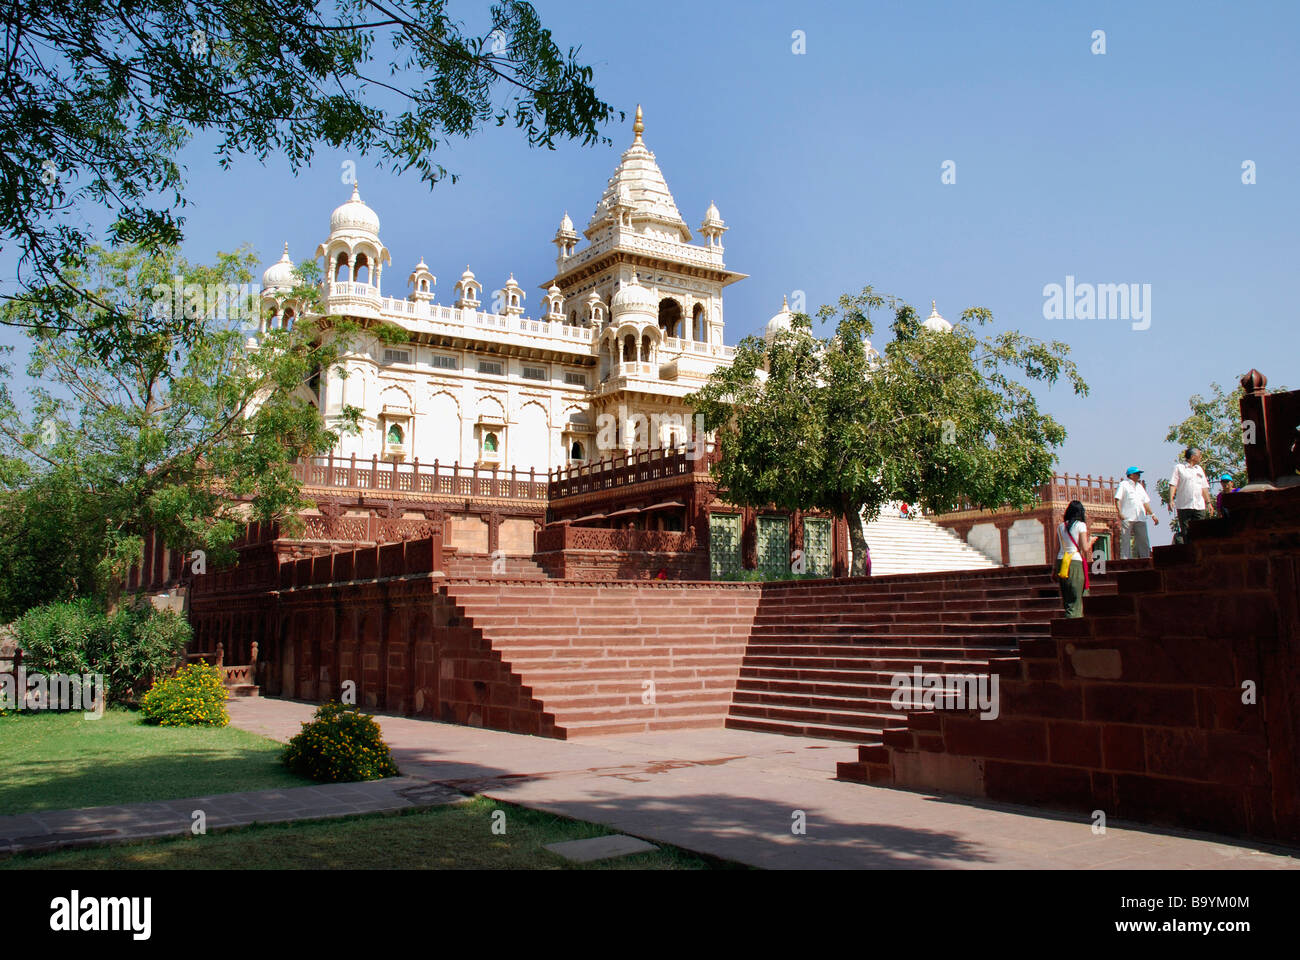 Jaswant Thada, built in 1899 with White Makrana marble as a Cenotaph for Jasawant Singh of Jodhpur, Rajasthan State, India. Stock Photo